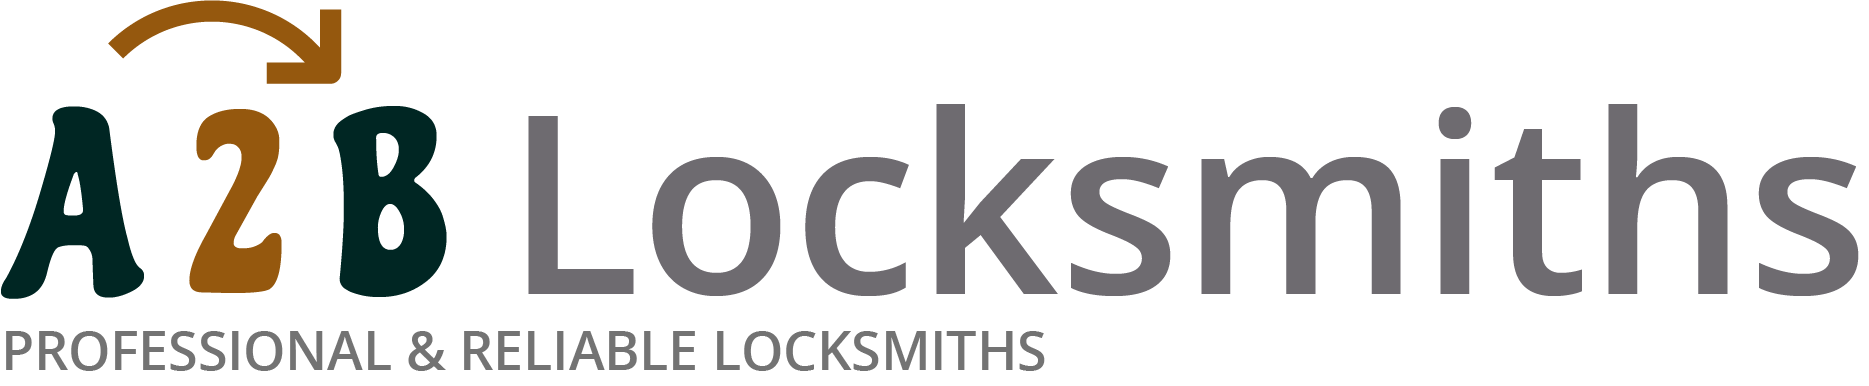 If you are locked out of house in Ascot, our 24/7 local emergency locksmith services can help you.